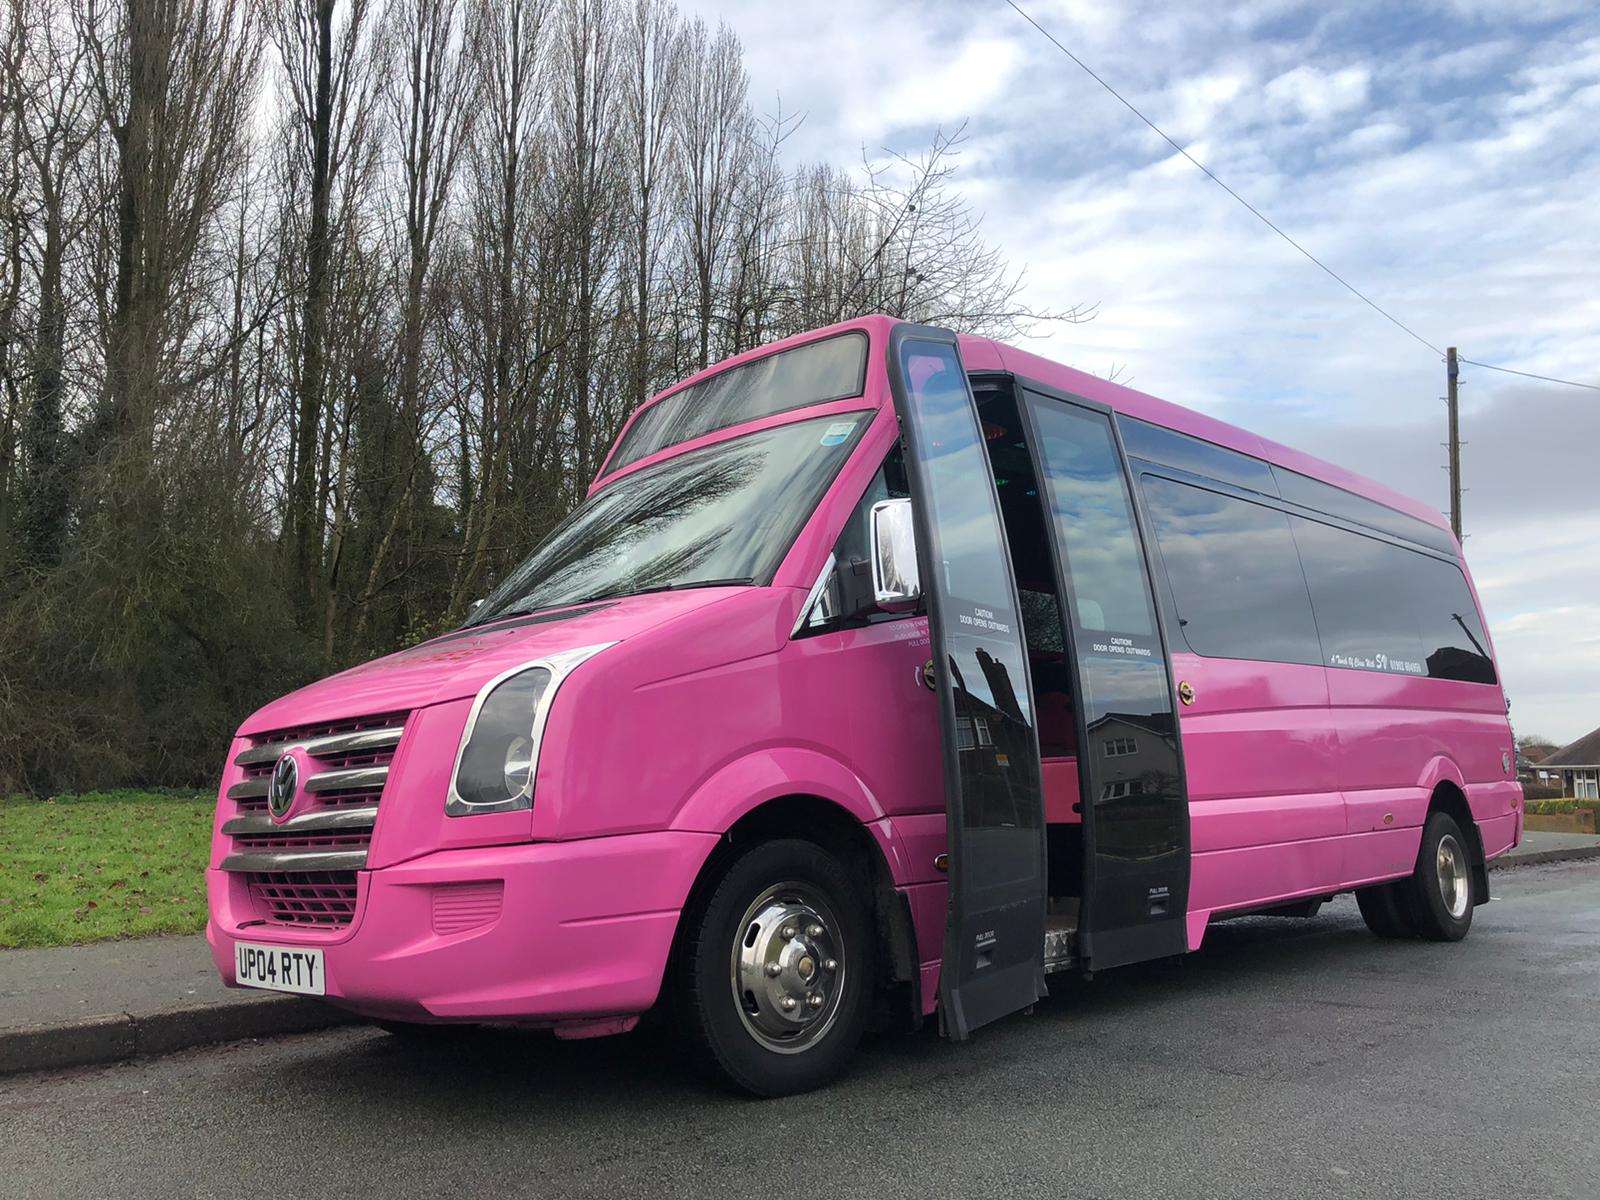 Maximising Fun on a Budget: Affordable Party Bus Hire Options in the UK